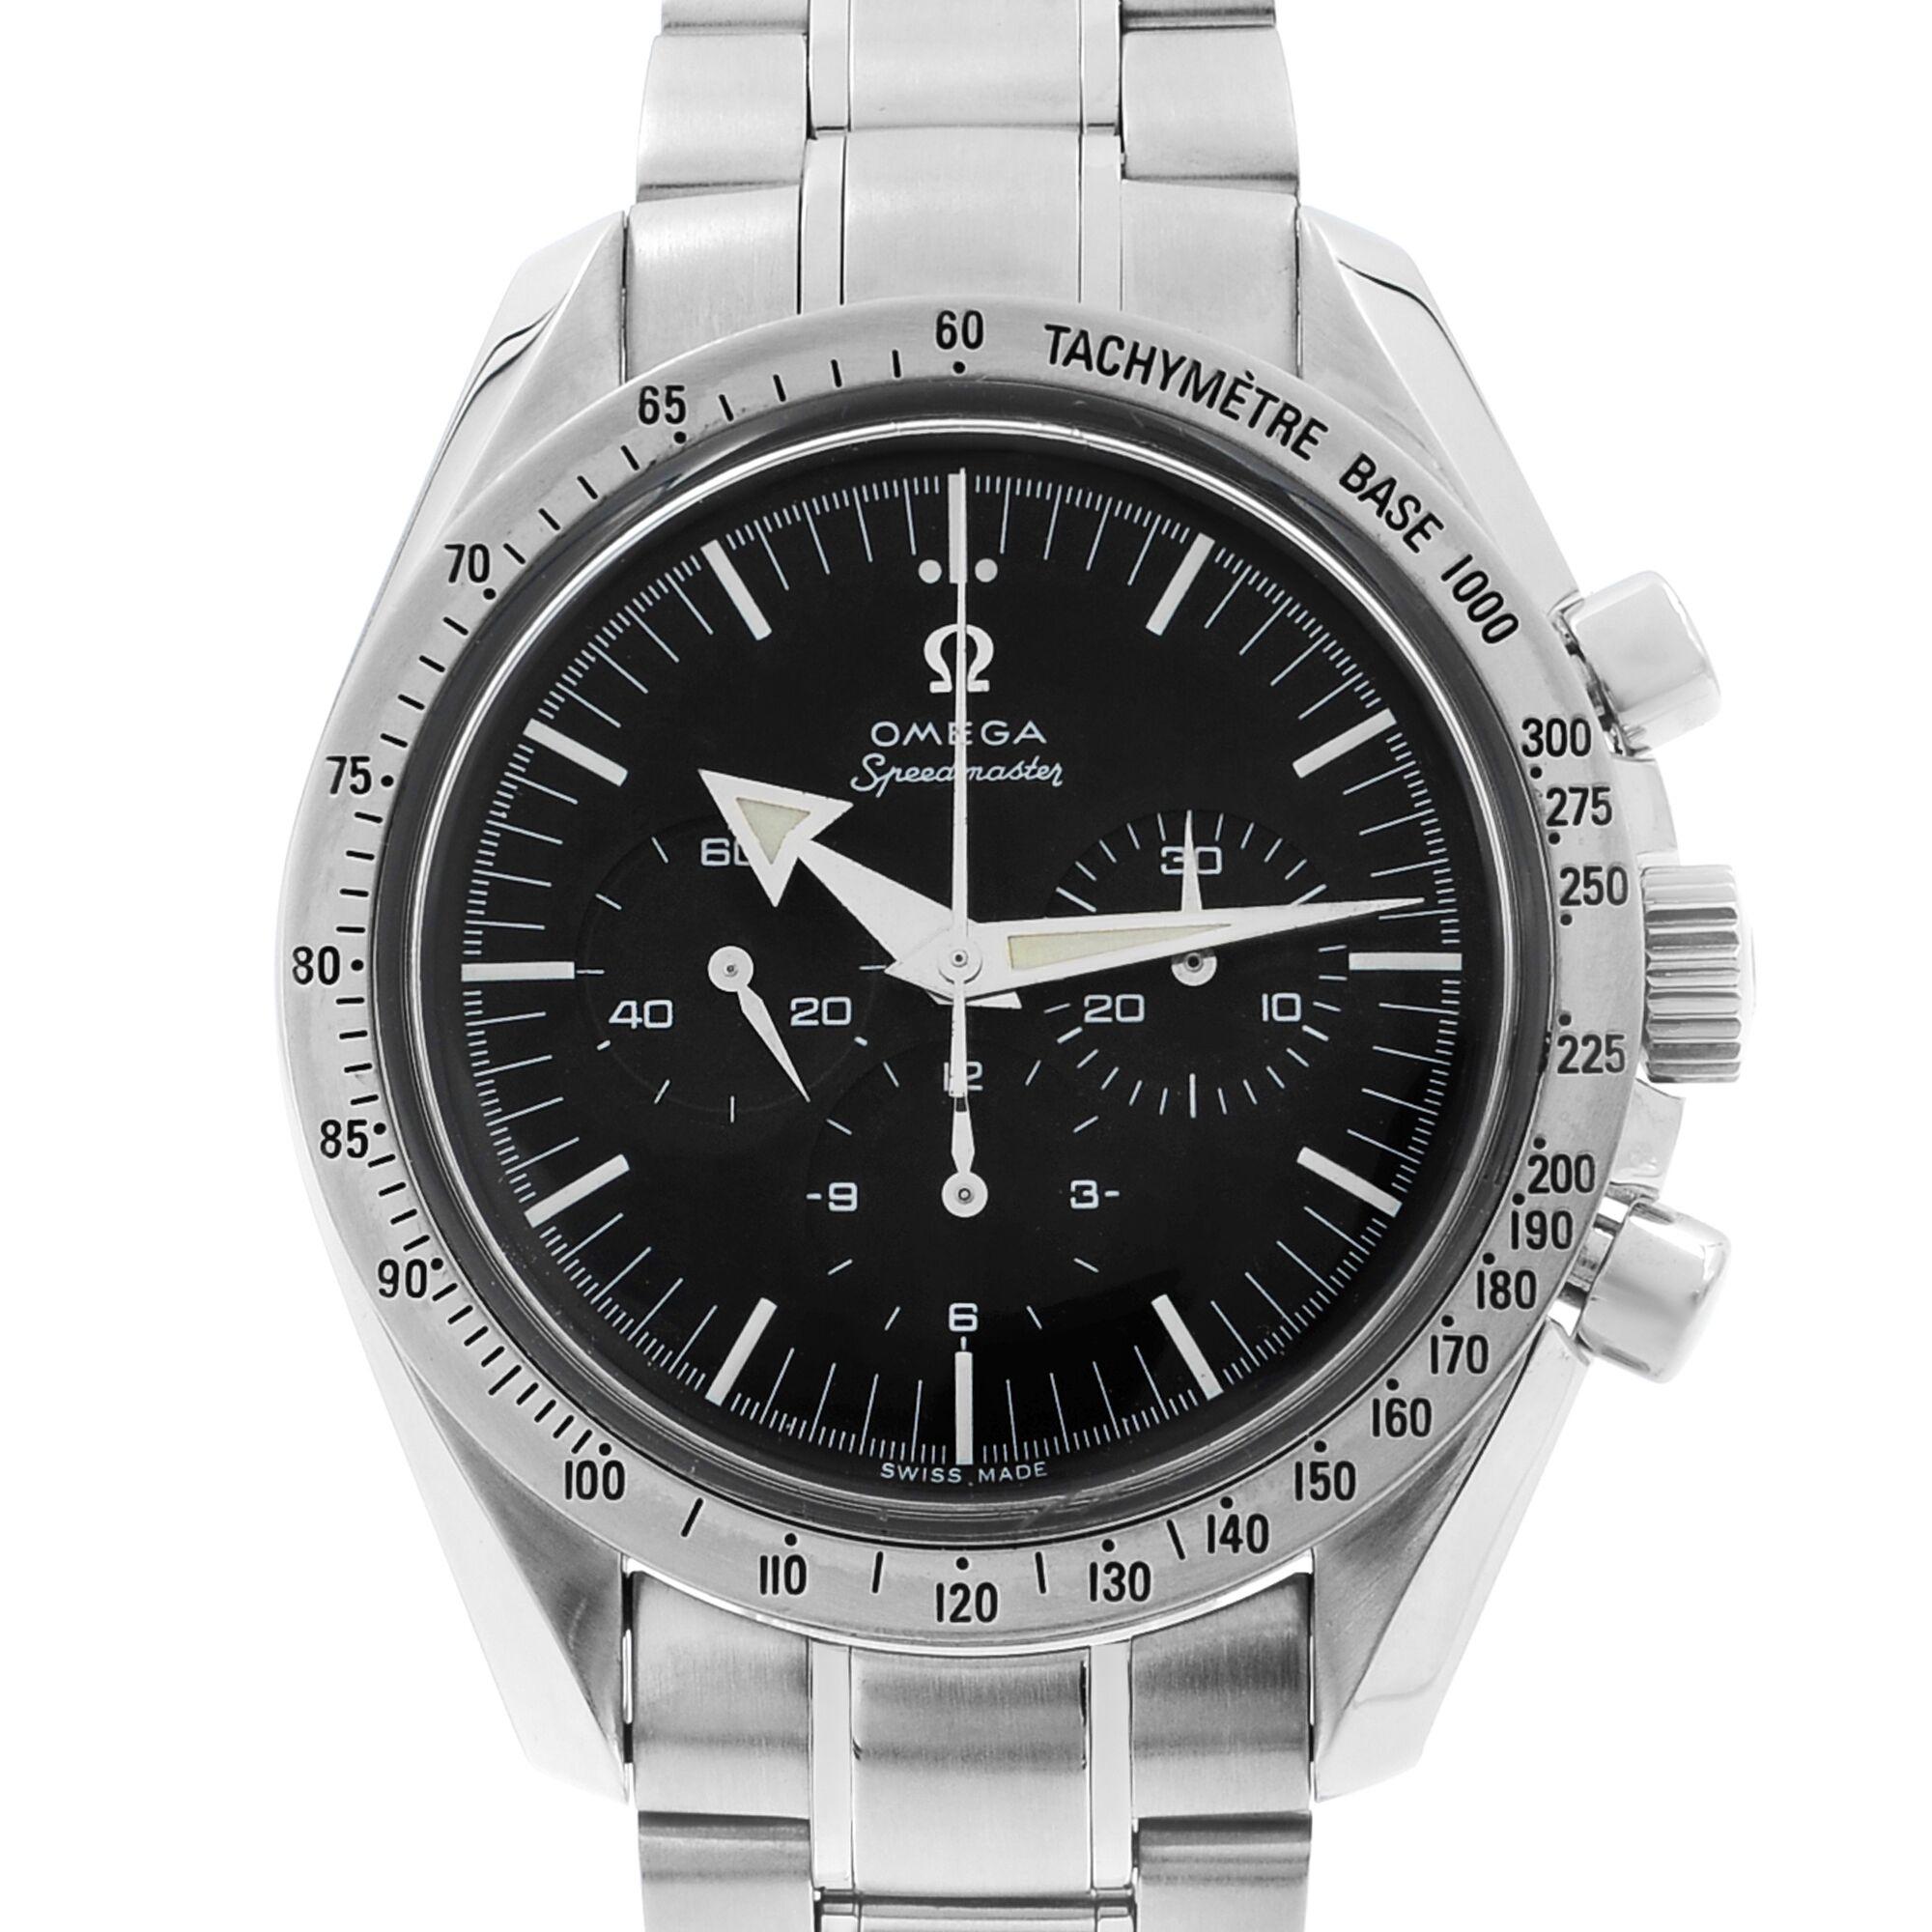 This pre-owned Omega Speedmaster 3594.50.00 is a beautiful men's timepiece that is powered by a mechanical movement which is cased in a stainless steel case. It has a round shape face, chronograph, chronograph hand, small seconds subdial, tachymeter